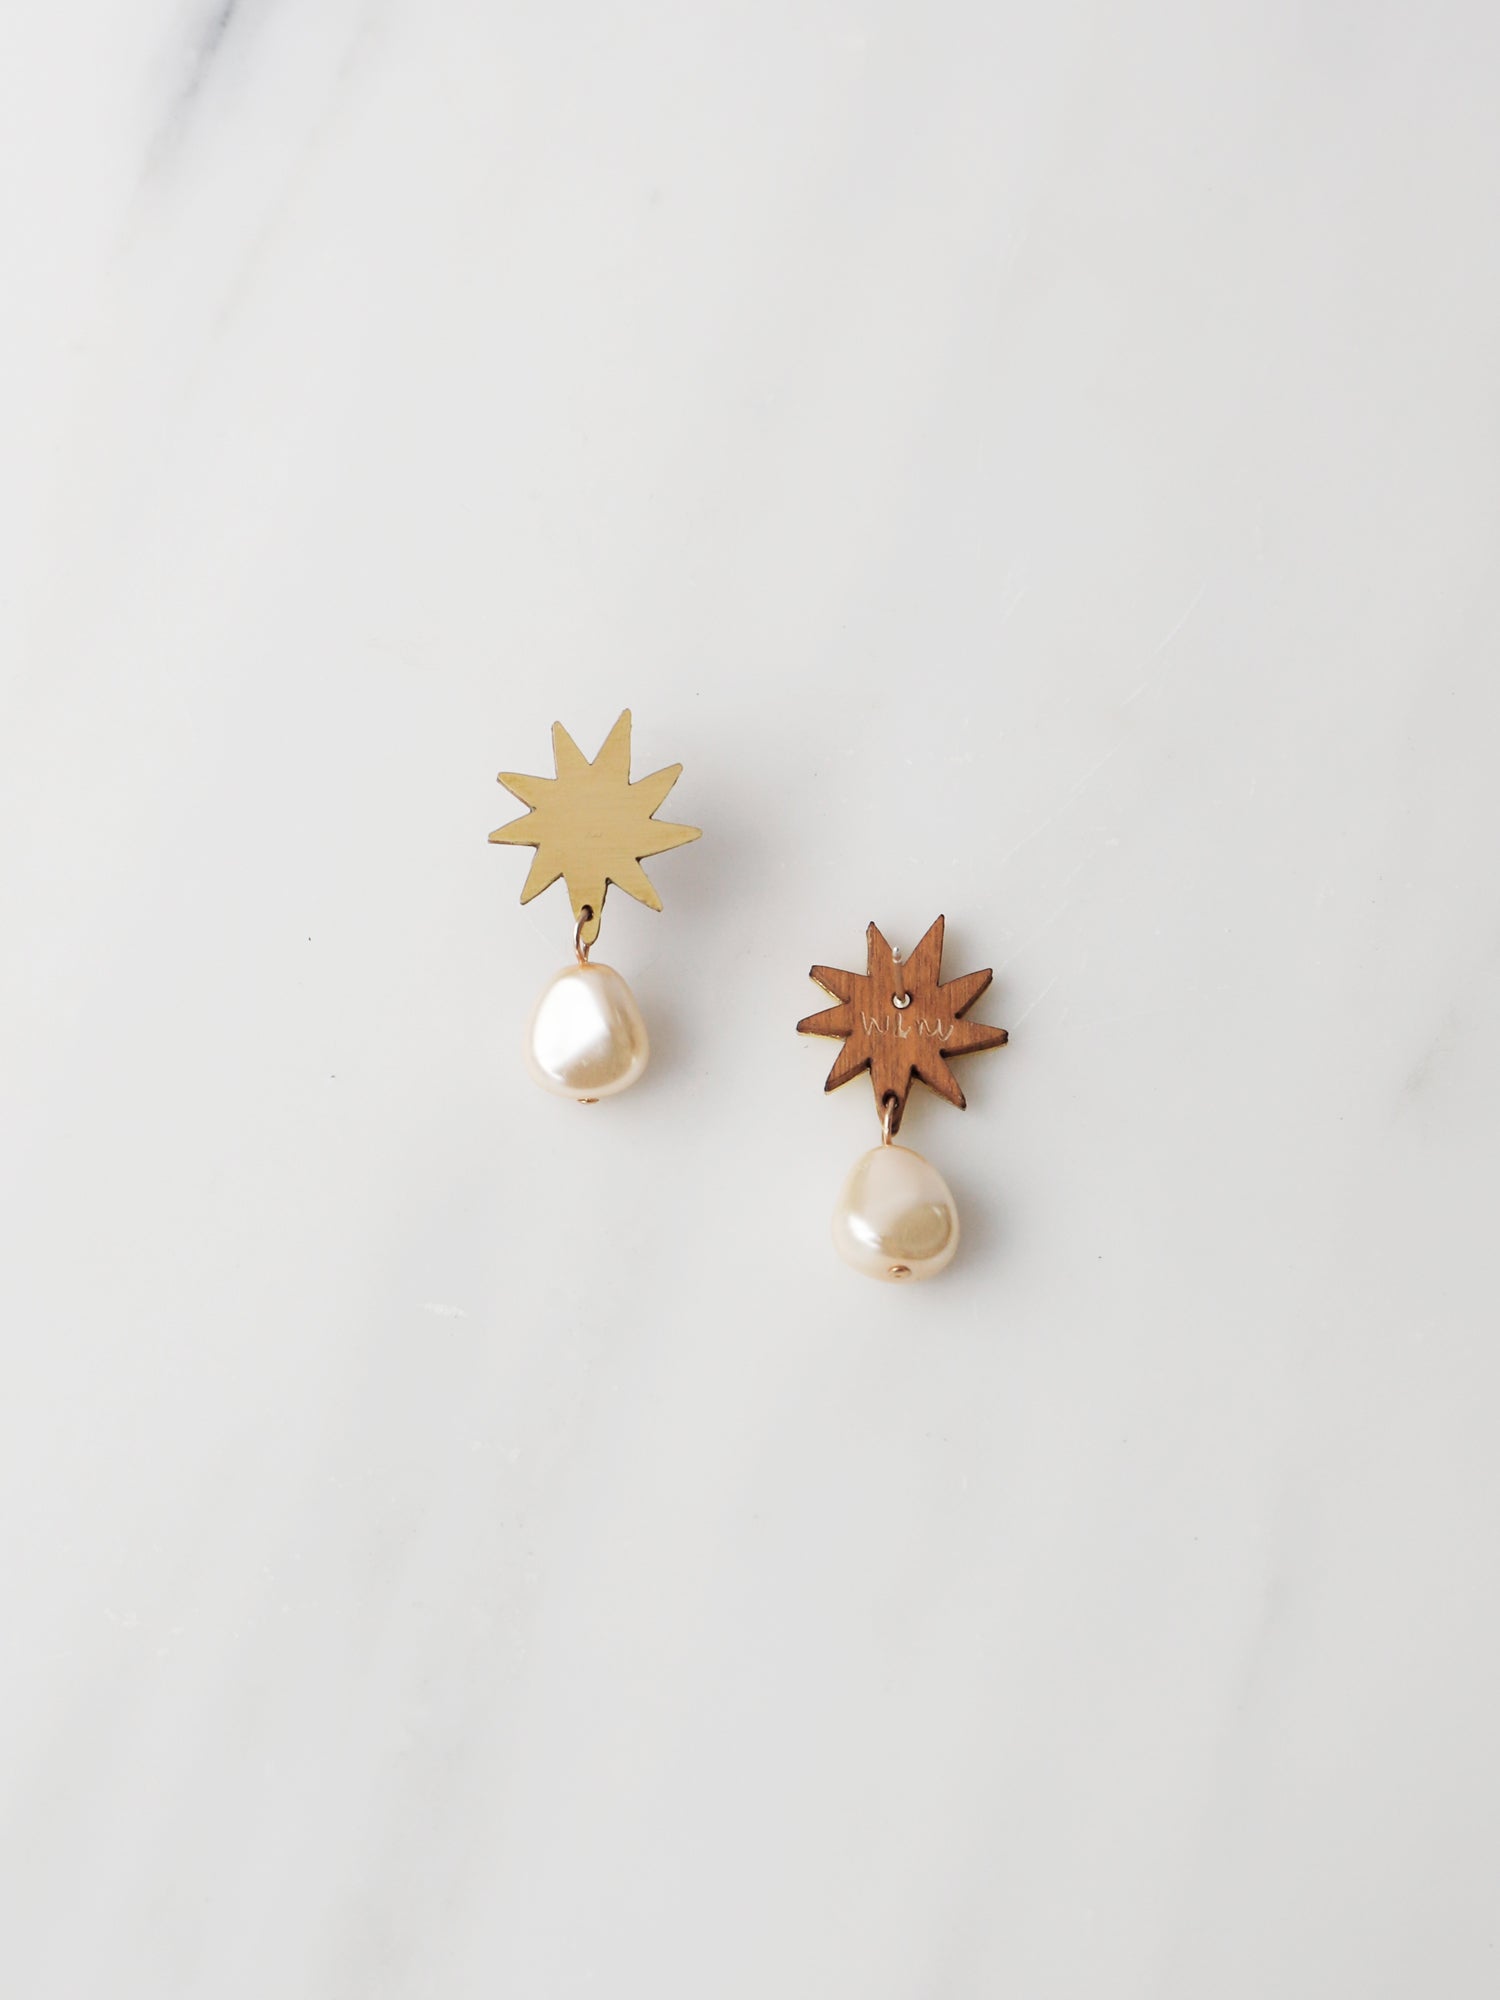 Playful pendant, inspired by Matisse's cutout-style stars. Made in brass with our signature wood base, Czech glass baroque pearl and 14k gold-filled chain. Handmade in the UK by Wolf & Moon.